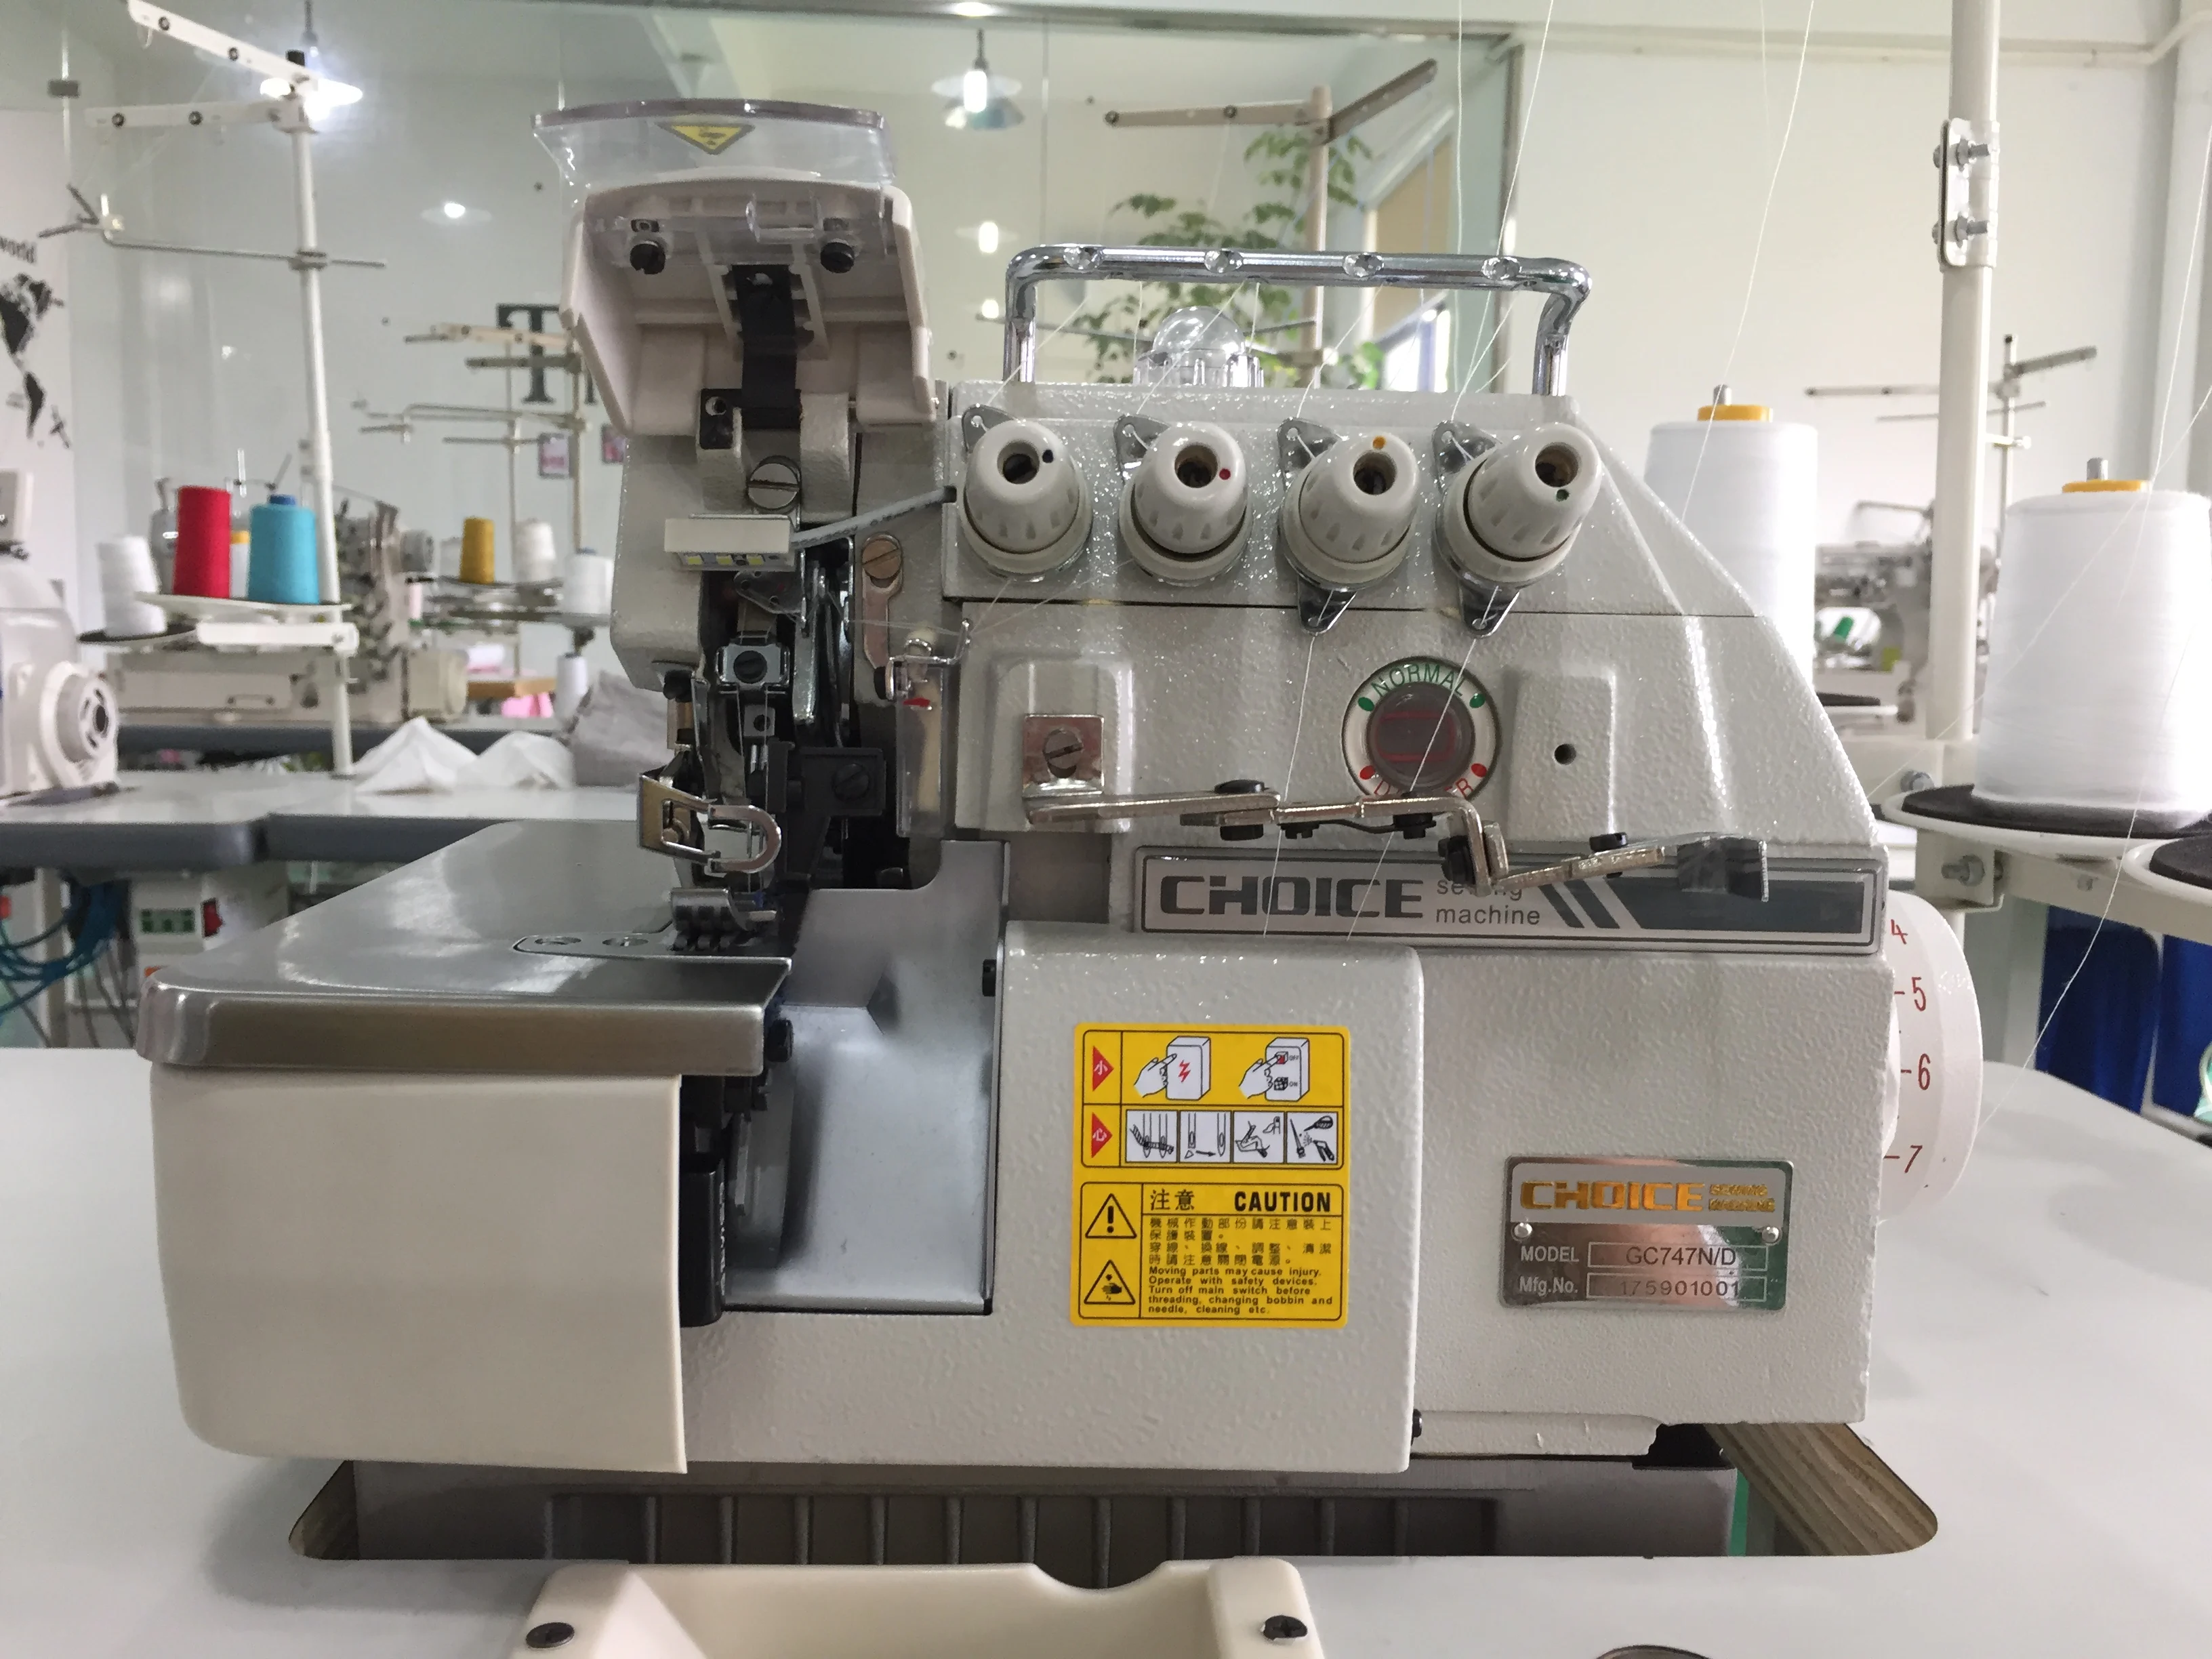 
Golden Choice GC747 high speed direct drive four thread overlock sewing machine industrial 